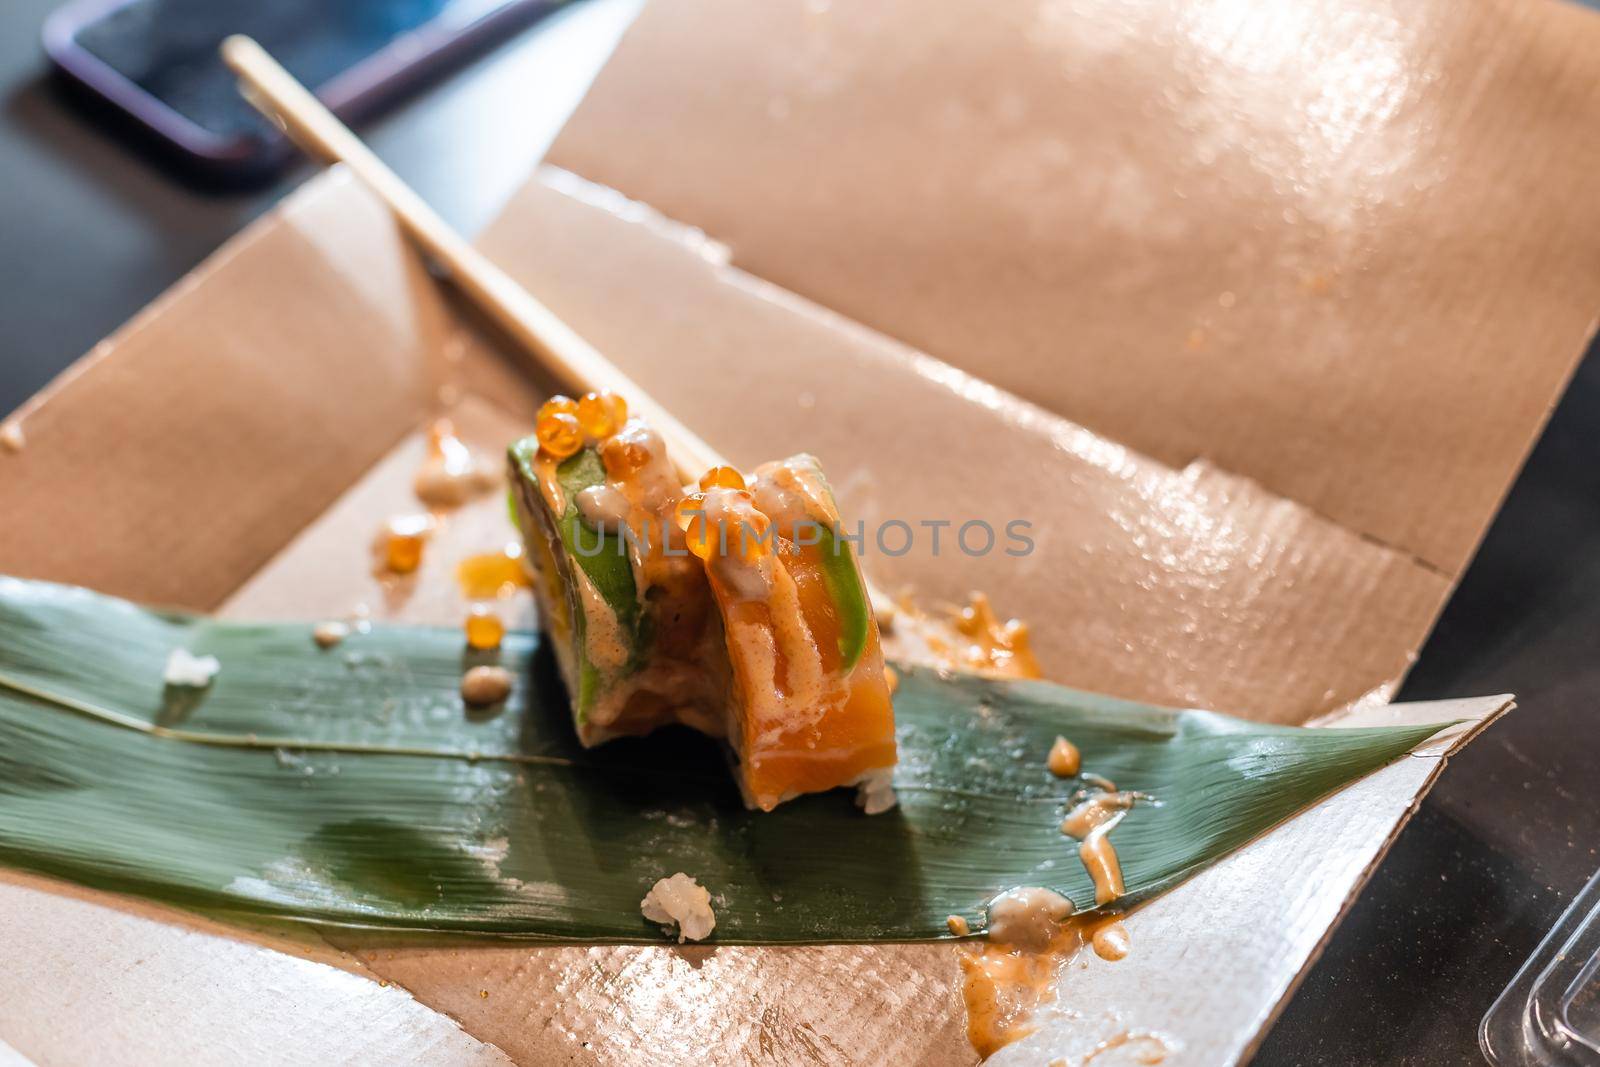 Woman eating sushi rolls at the table - close up photo. Traditional Japanese oriental kitchen with raw fish.